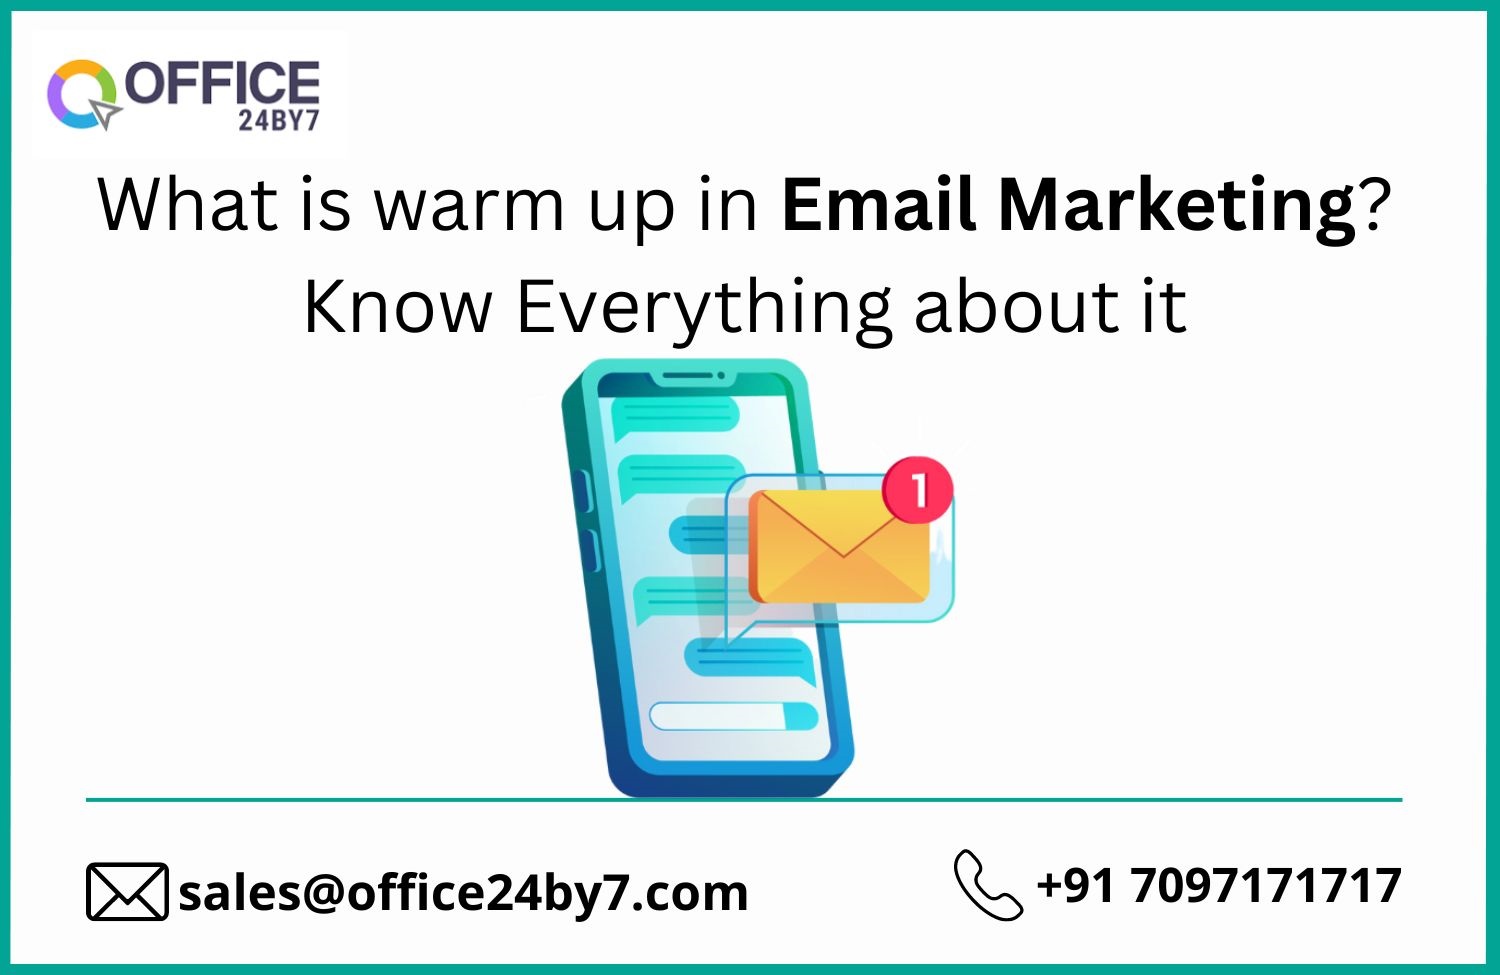 Email Marketing-bc59ce84